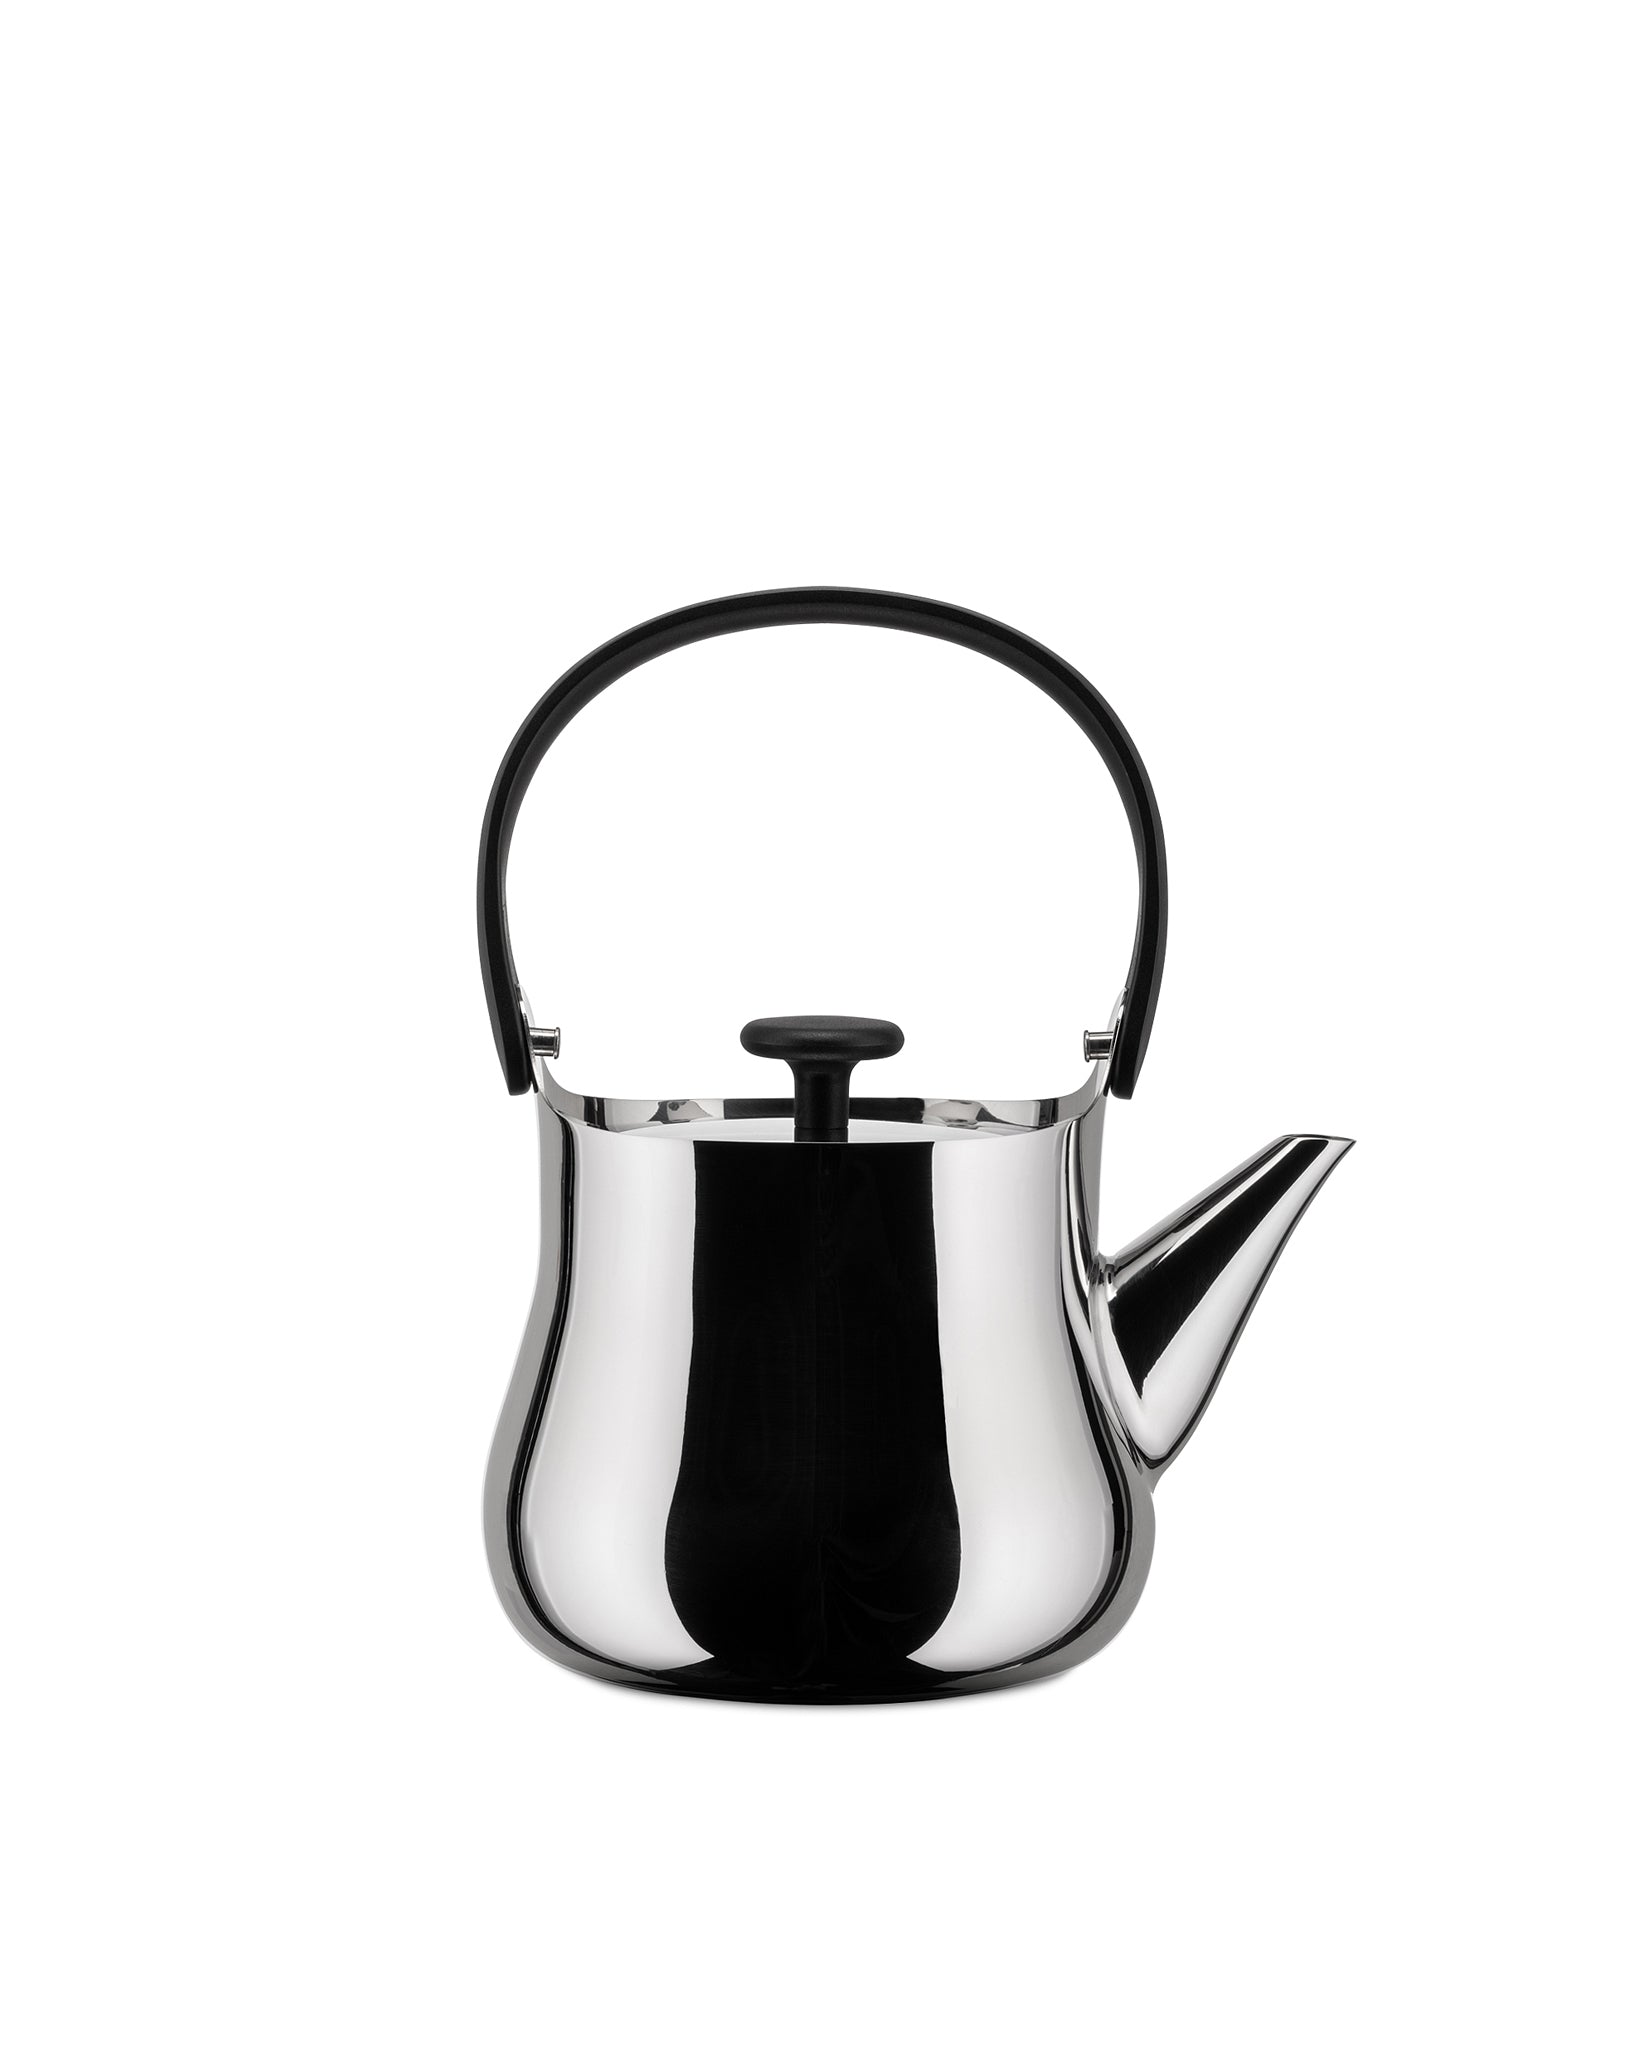 Alessi Cha Kettle/Teapot i Handle Thermoplastic Resin